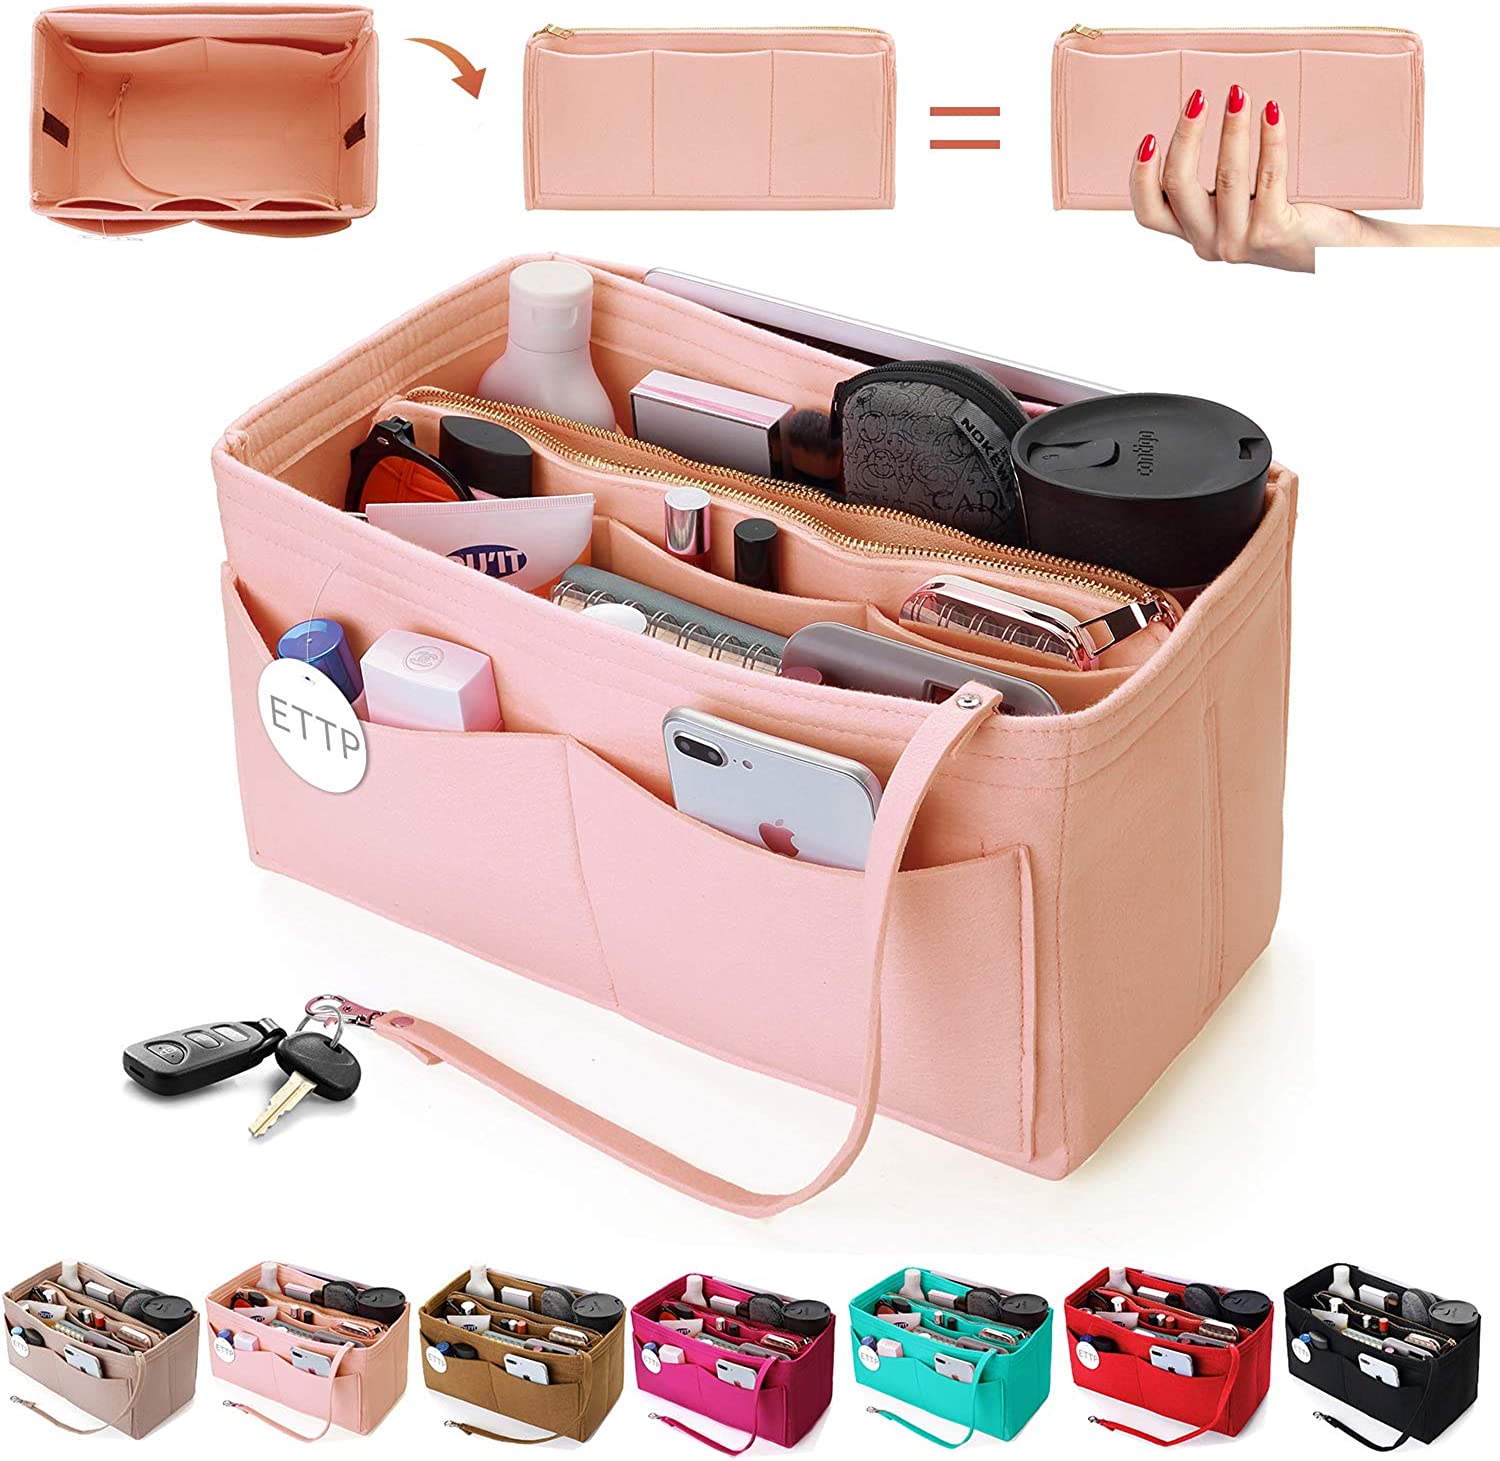  ETTP Purse Organizer Insert For Handbags, Tote Bag Organizer  Insert, Handbag Organizer For Tote & Handbags, Compatible with Neverful  Speedy and More (Medium,Black) : Clothing, Shoes & Jewelry